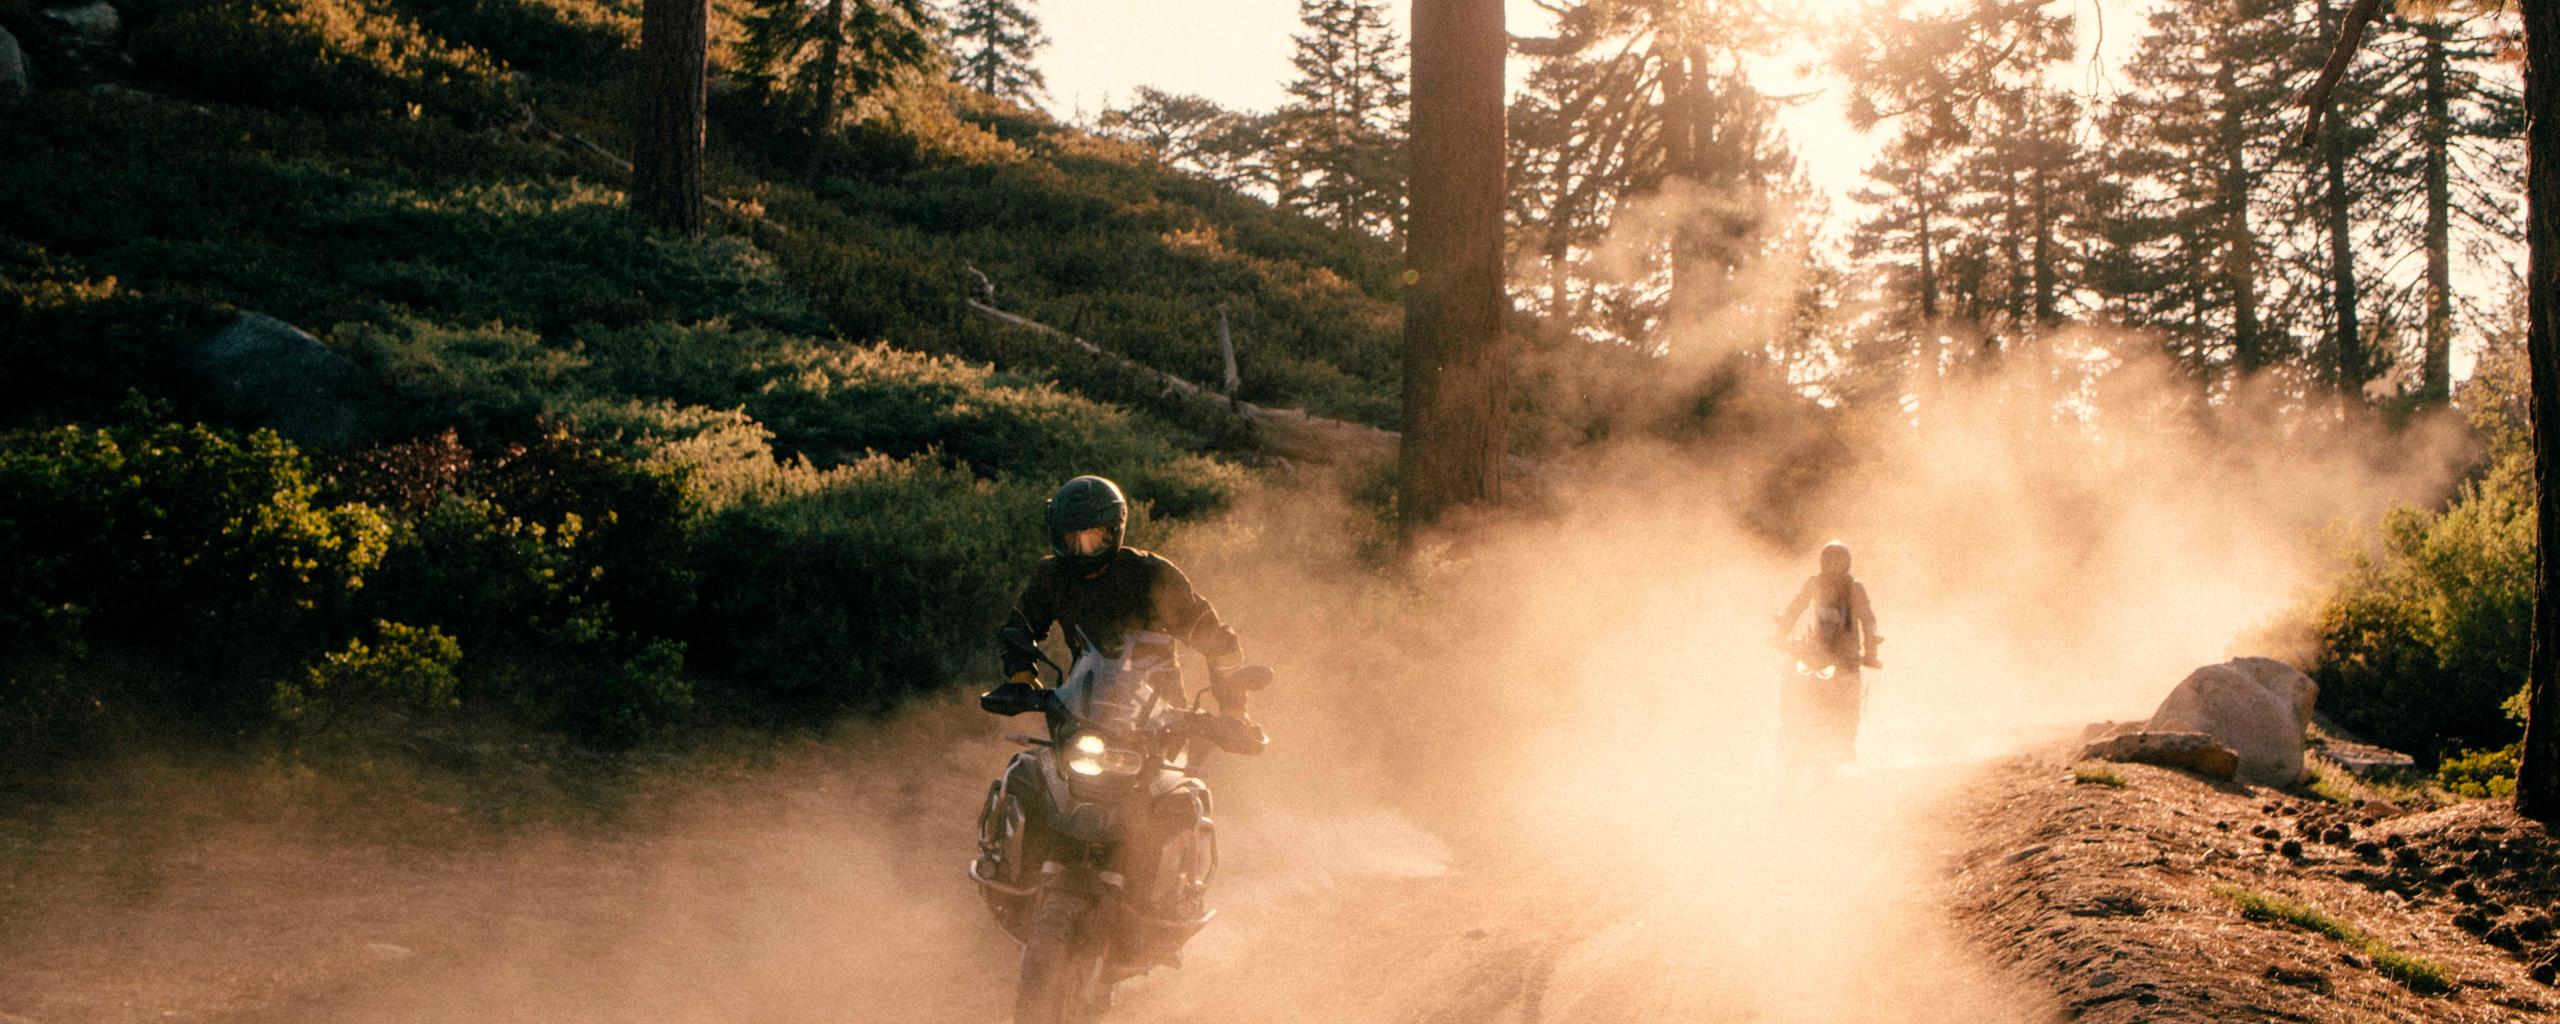 Two motorcyclists riding on dirt path through mountains in Big Bear, California